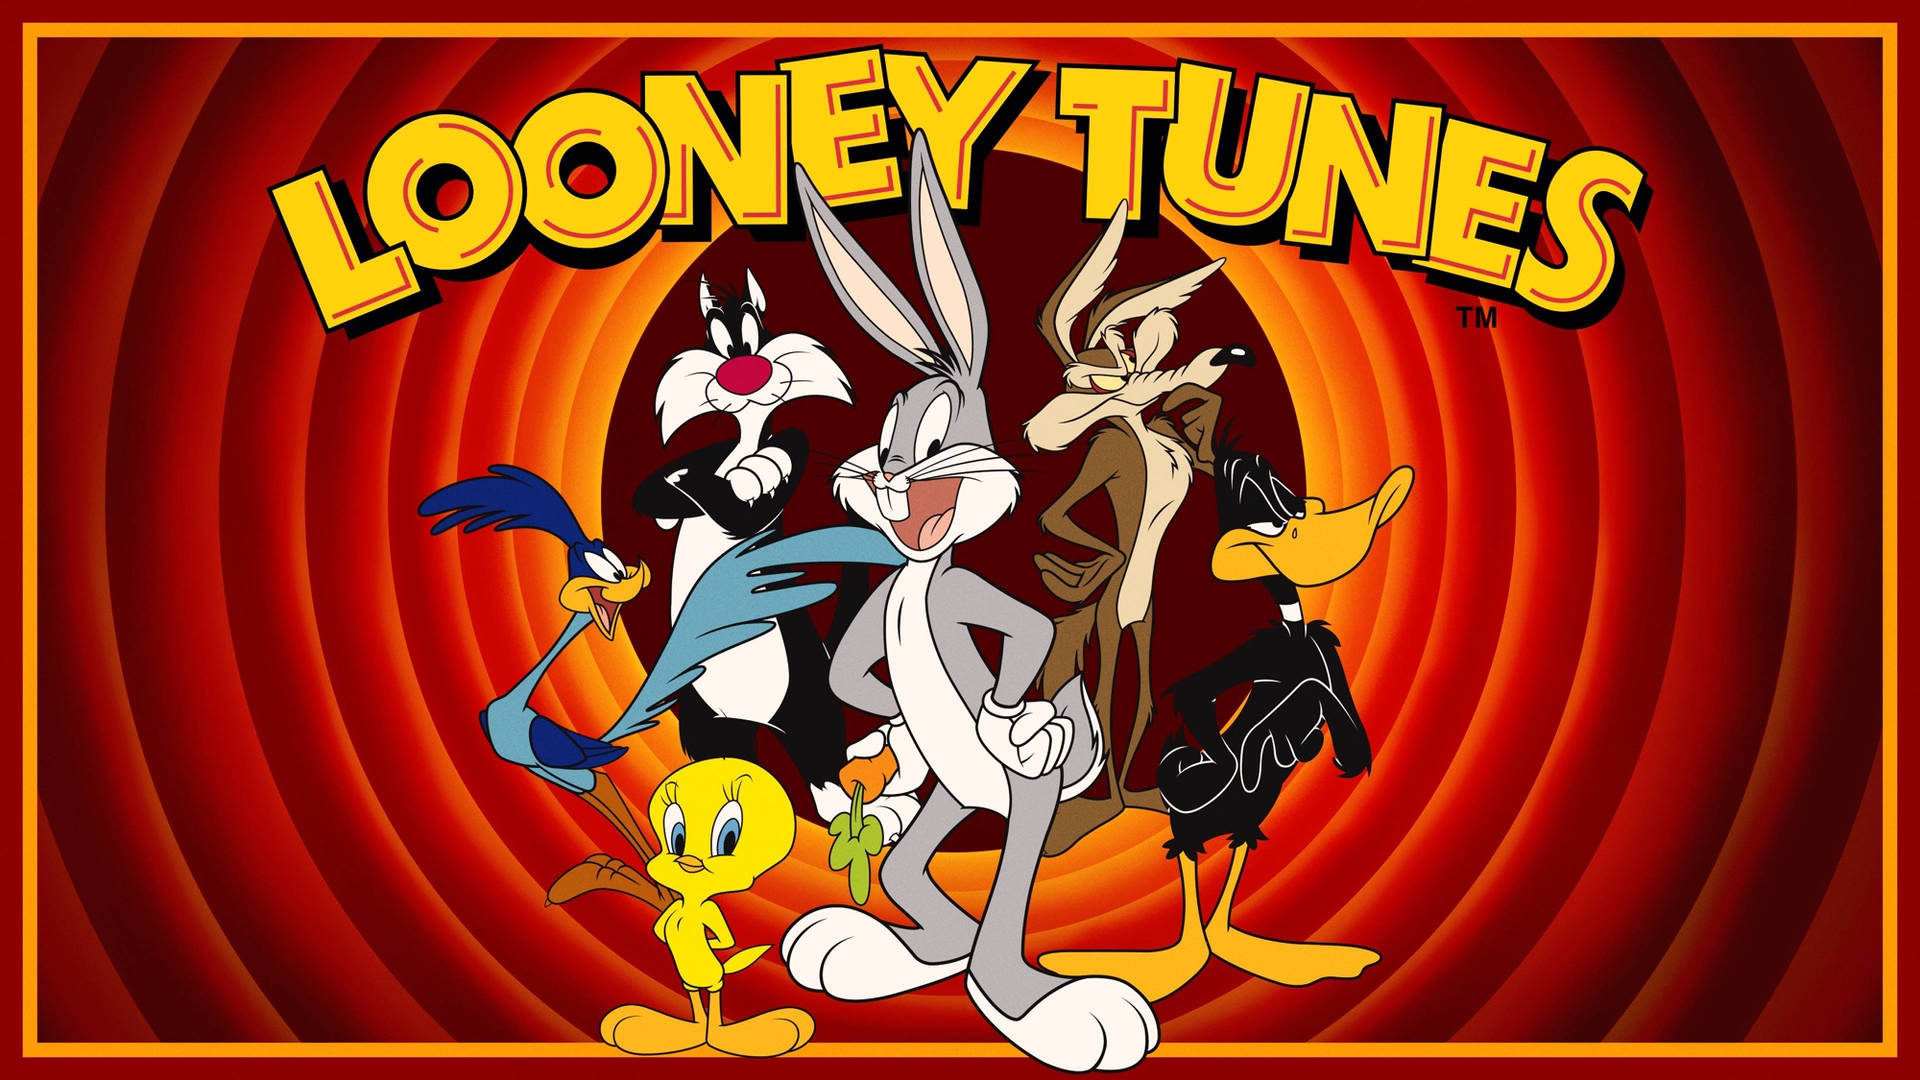 Wile E Coyote fra Looney Tunes Wallpaper